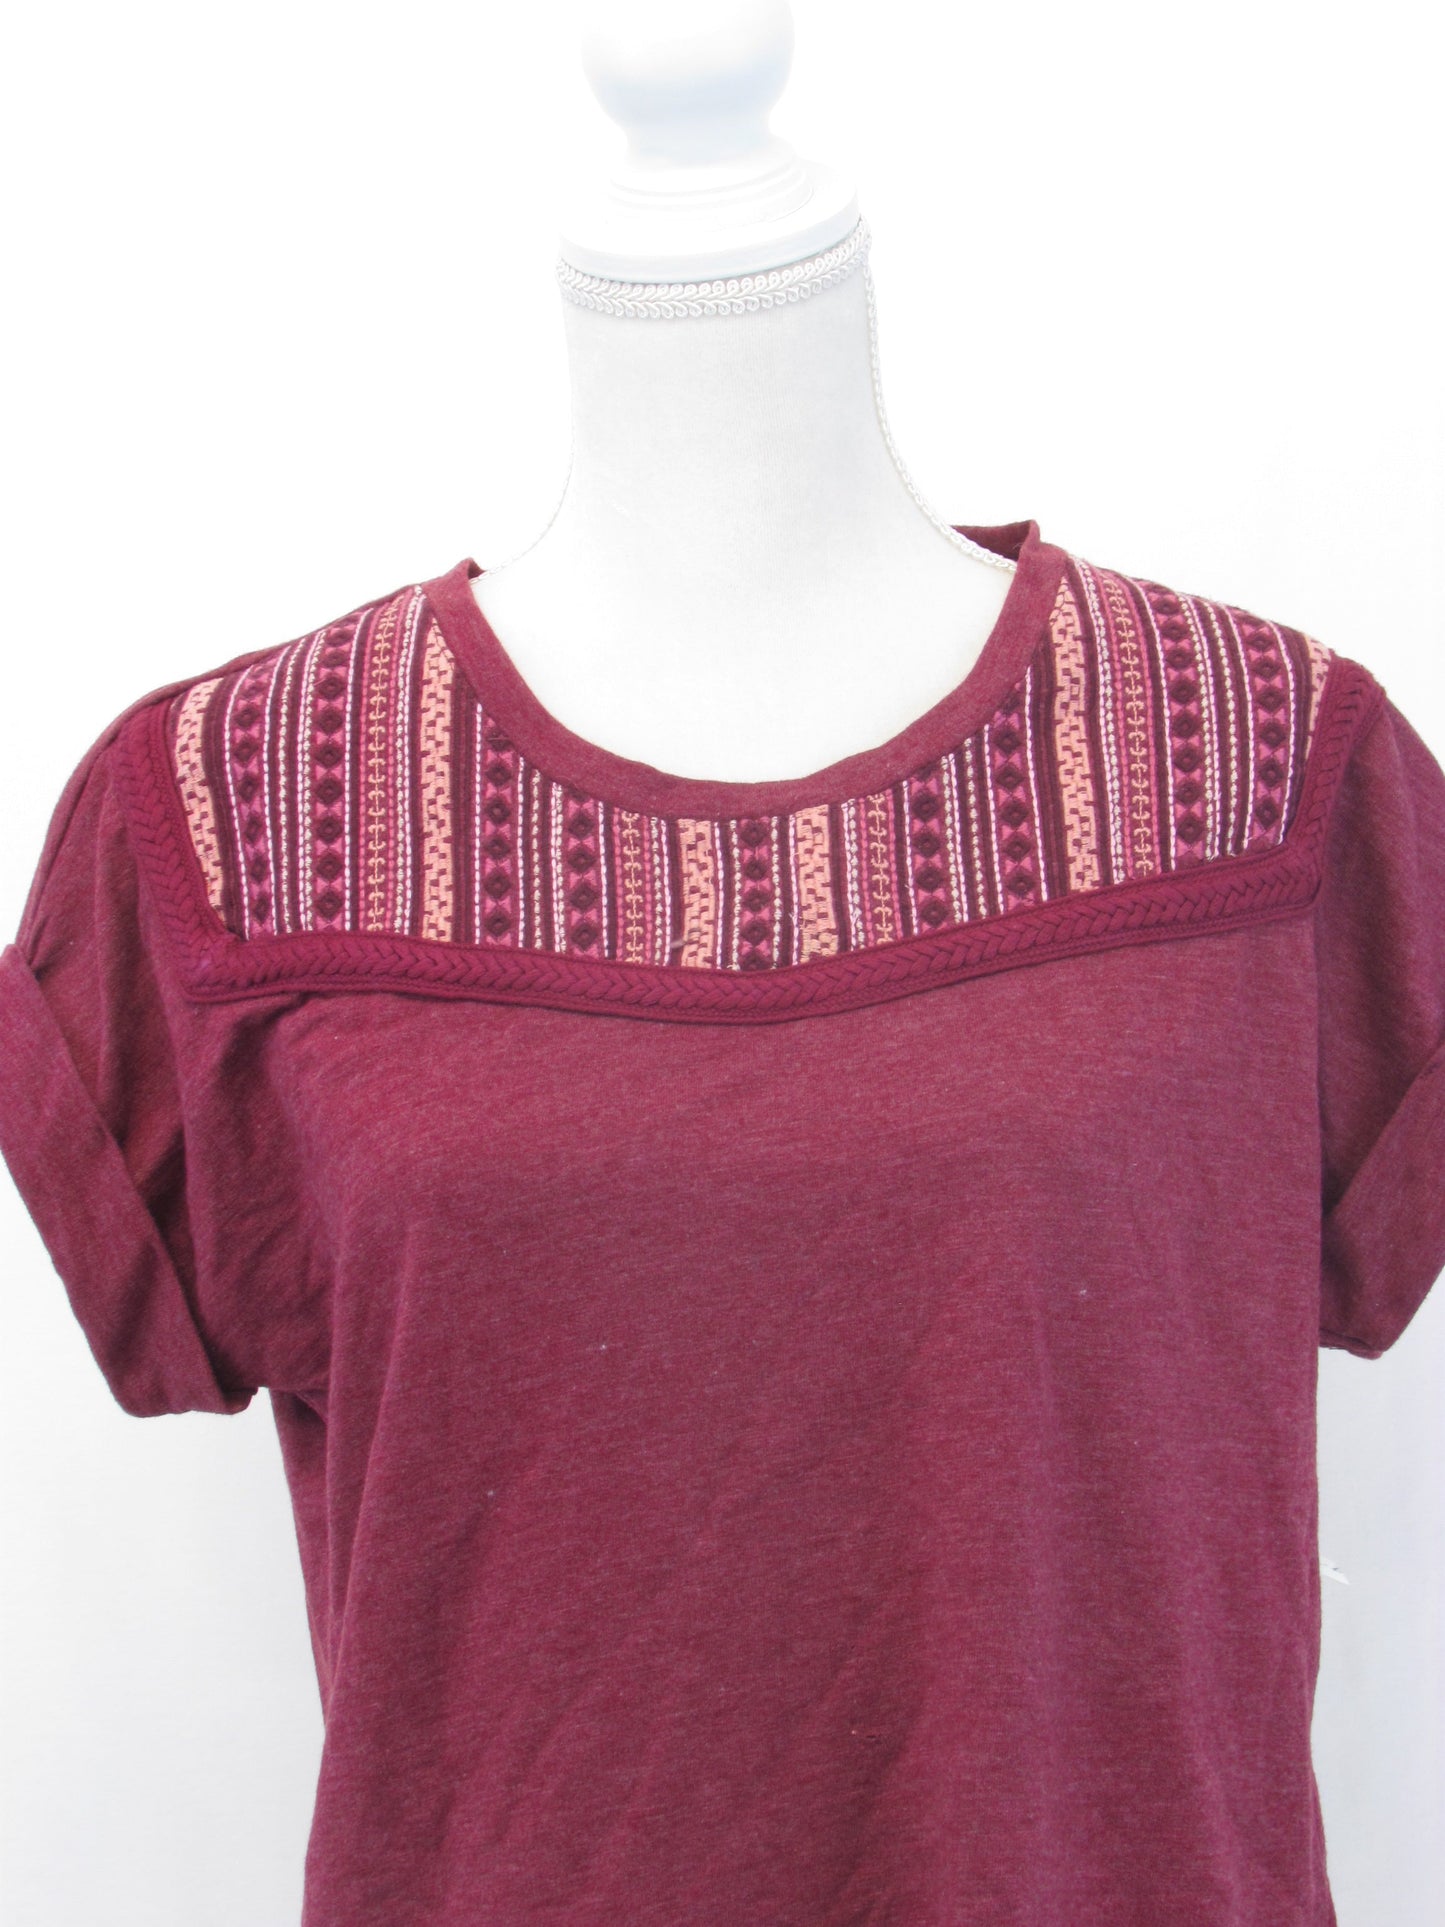 Style & Co. Top Embroidered Short-Sleeve Top Orchard Vine Small